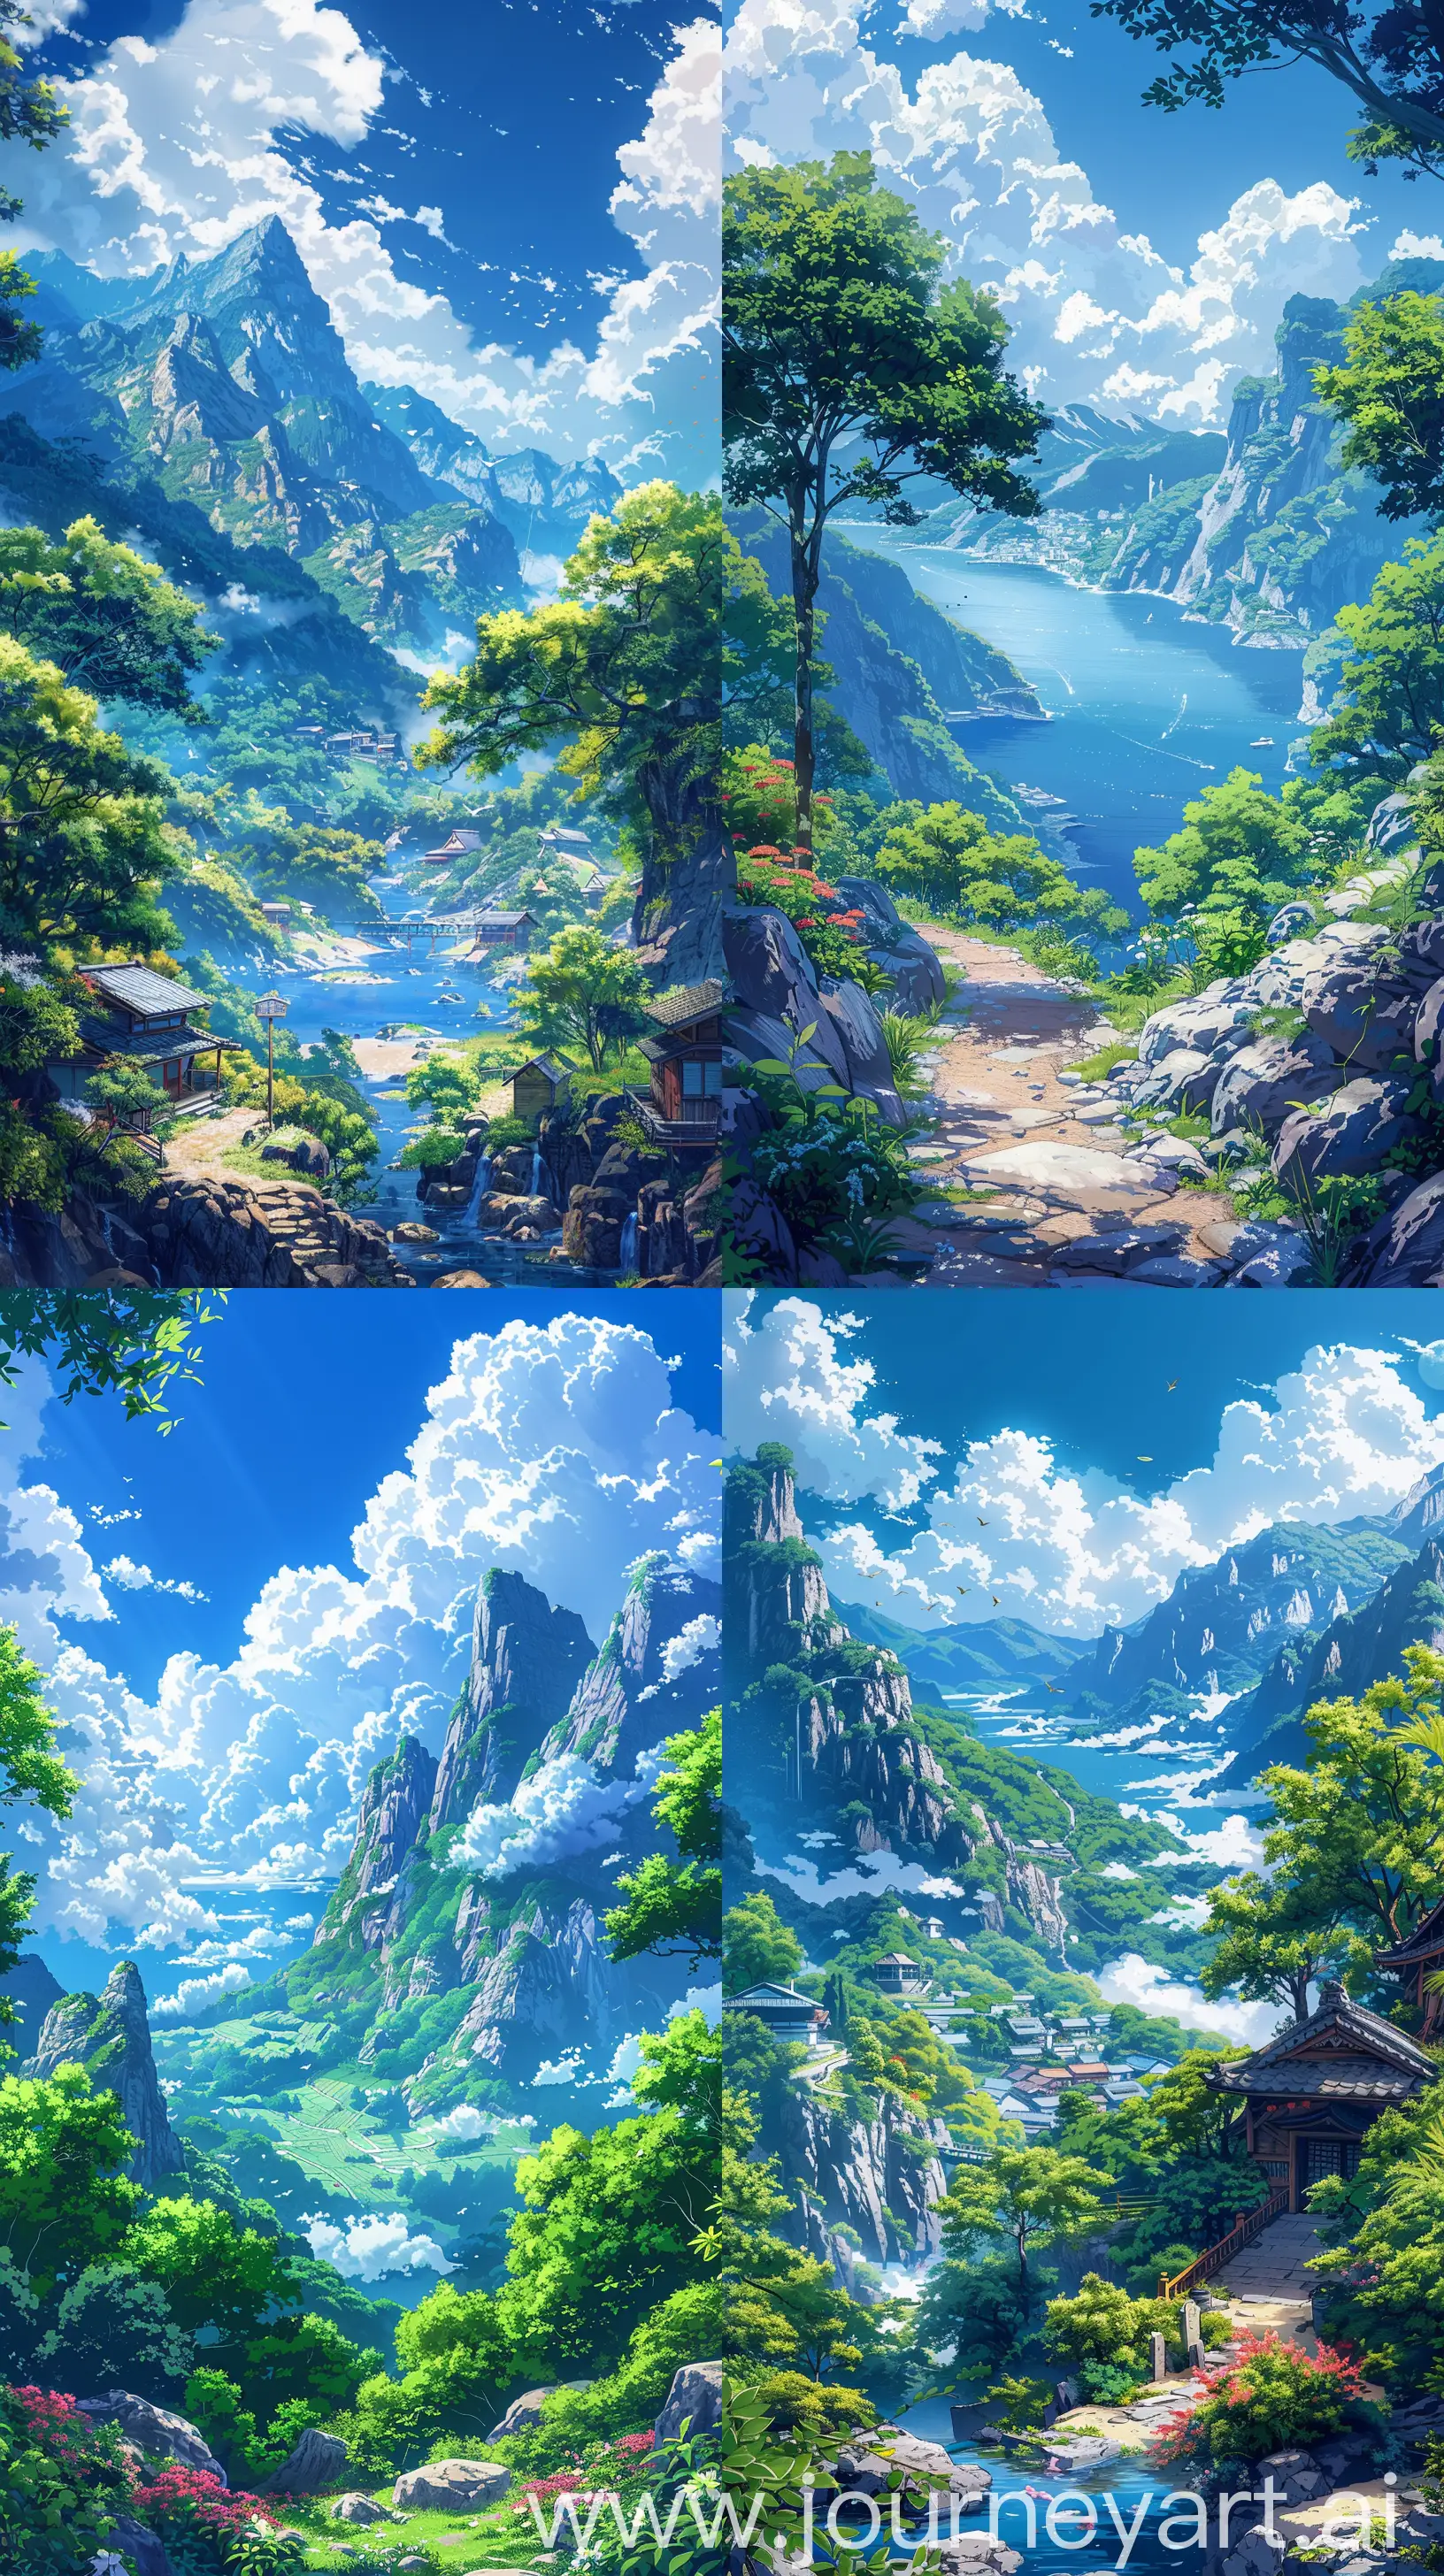 Beautiful anime scenary, mokoto shinkai style, a beautiful summer time, "verious nature scenaries ", nature tranquility, anime style different places with quite and calm view, beautiful sky, High quality, Day time, illustration ultra HD, high quality, sharp details, no blurry, no hyperrealistic --ar 9:16 --s 600